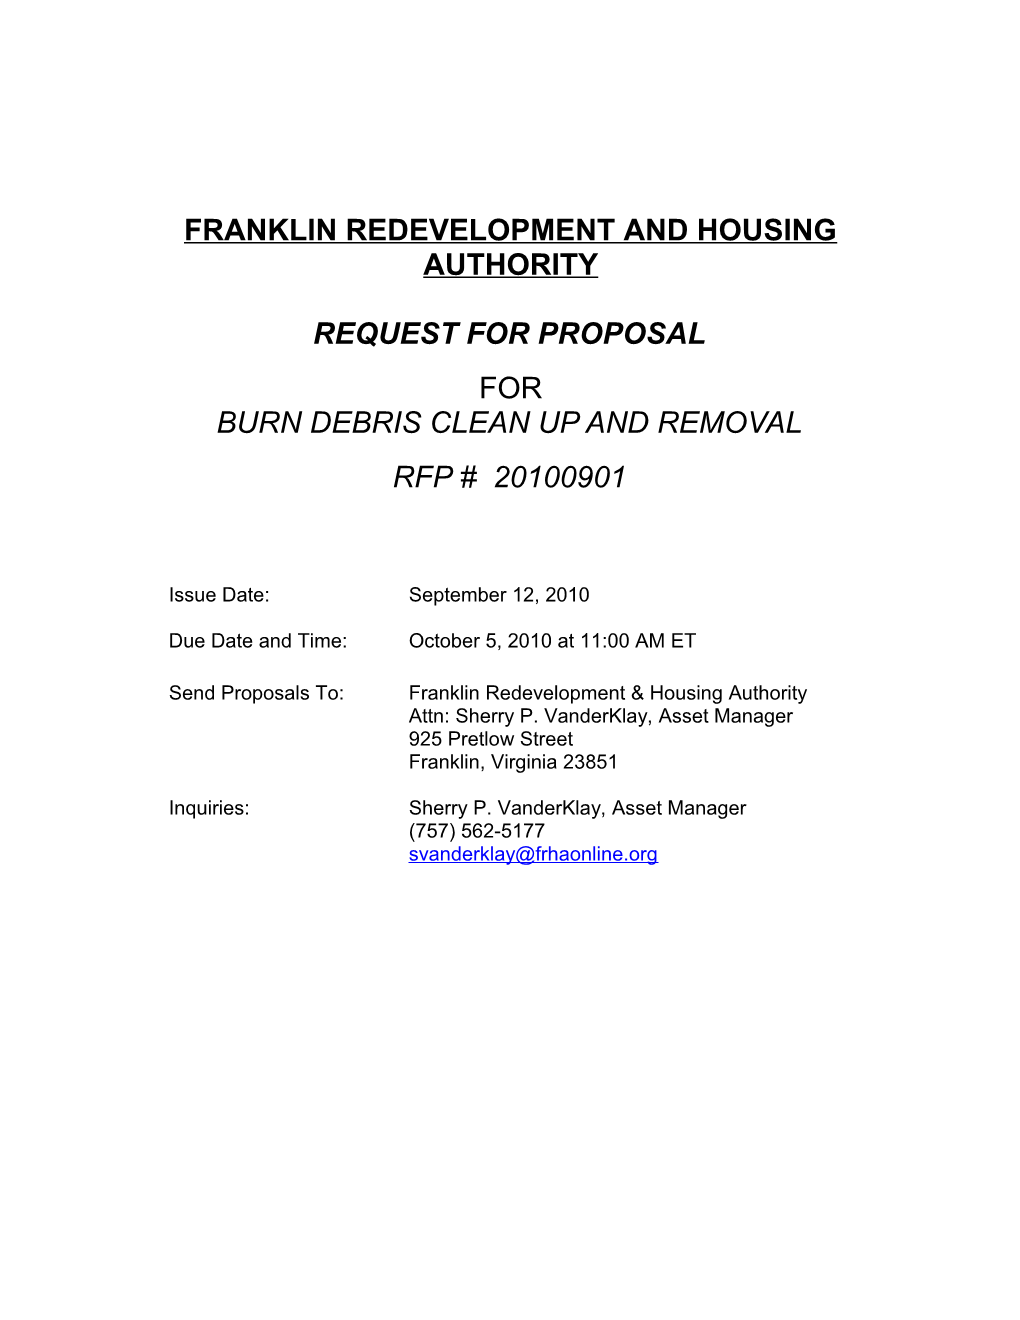 Franklin Redevelopment and Housing Authority